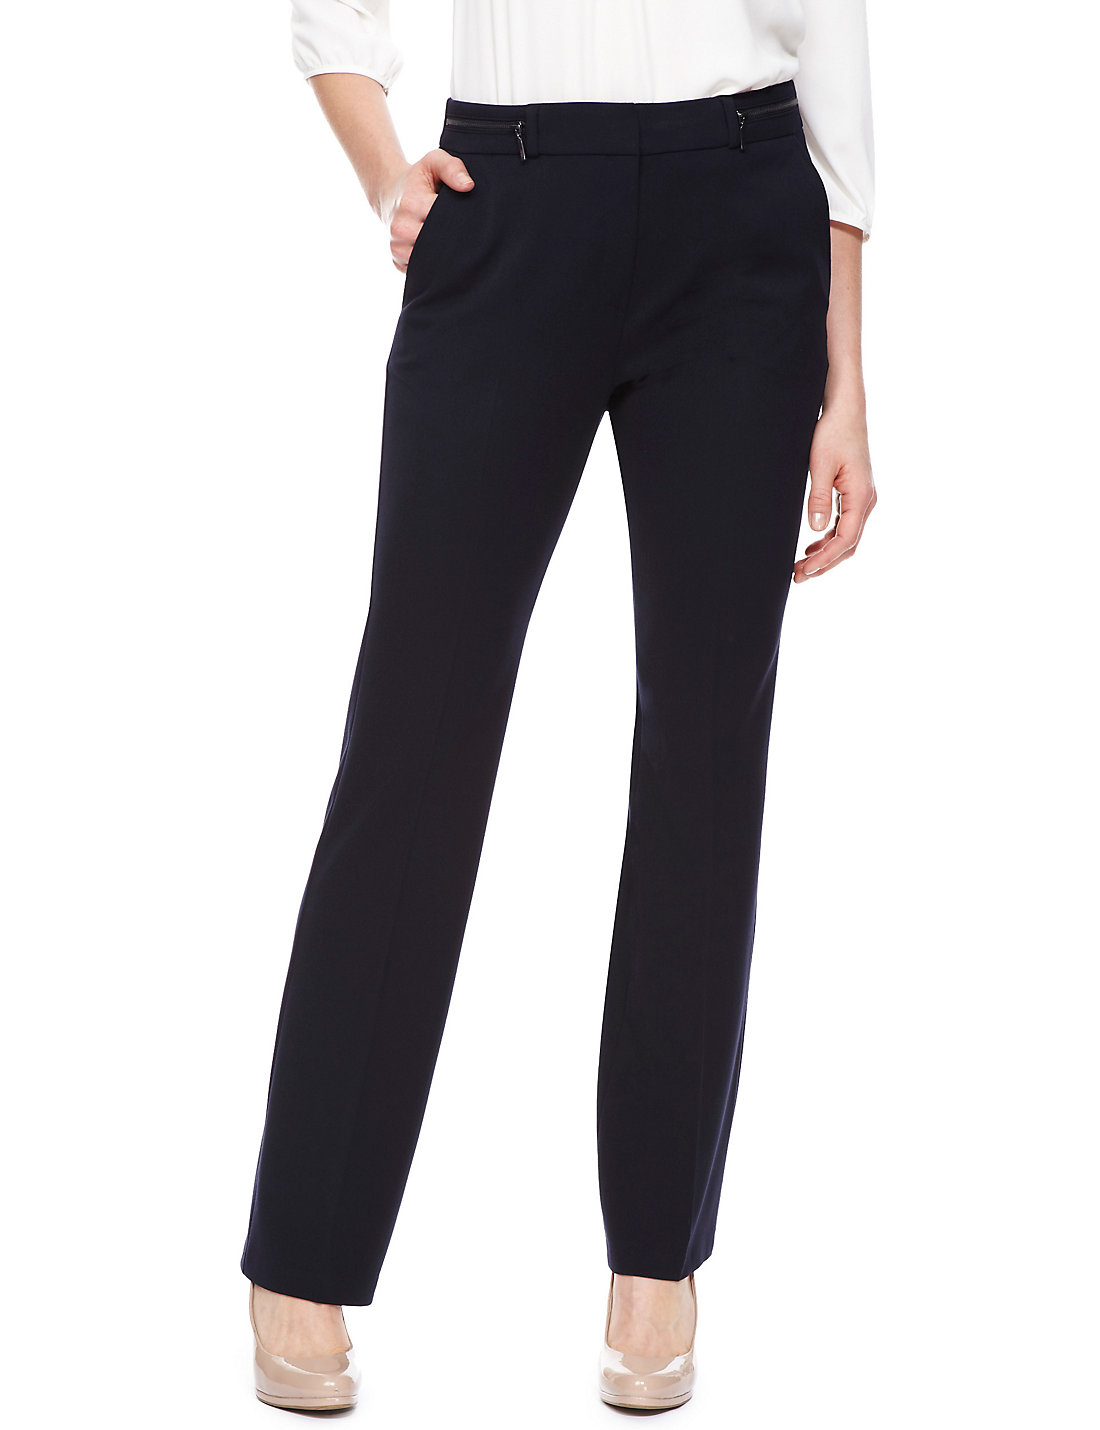 Marks and Spencer - - M&5 NAVY Zipped Waist Bootleg Trousers - Plus ...